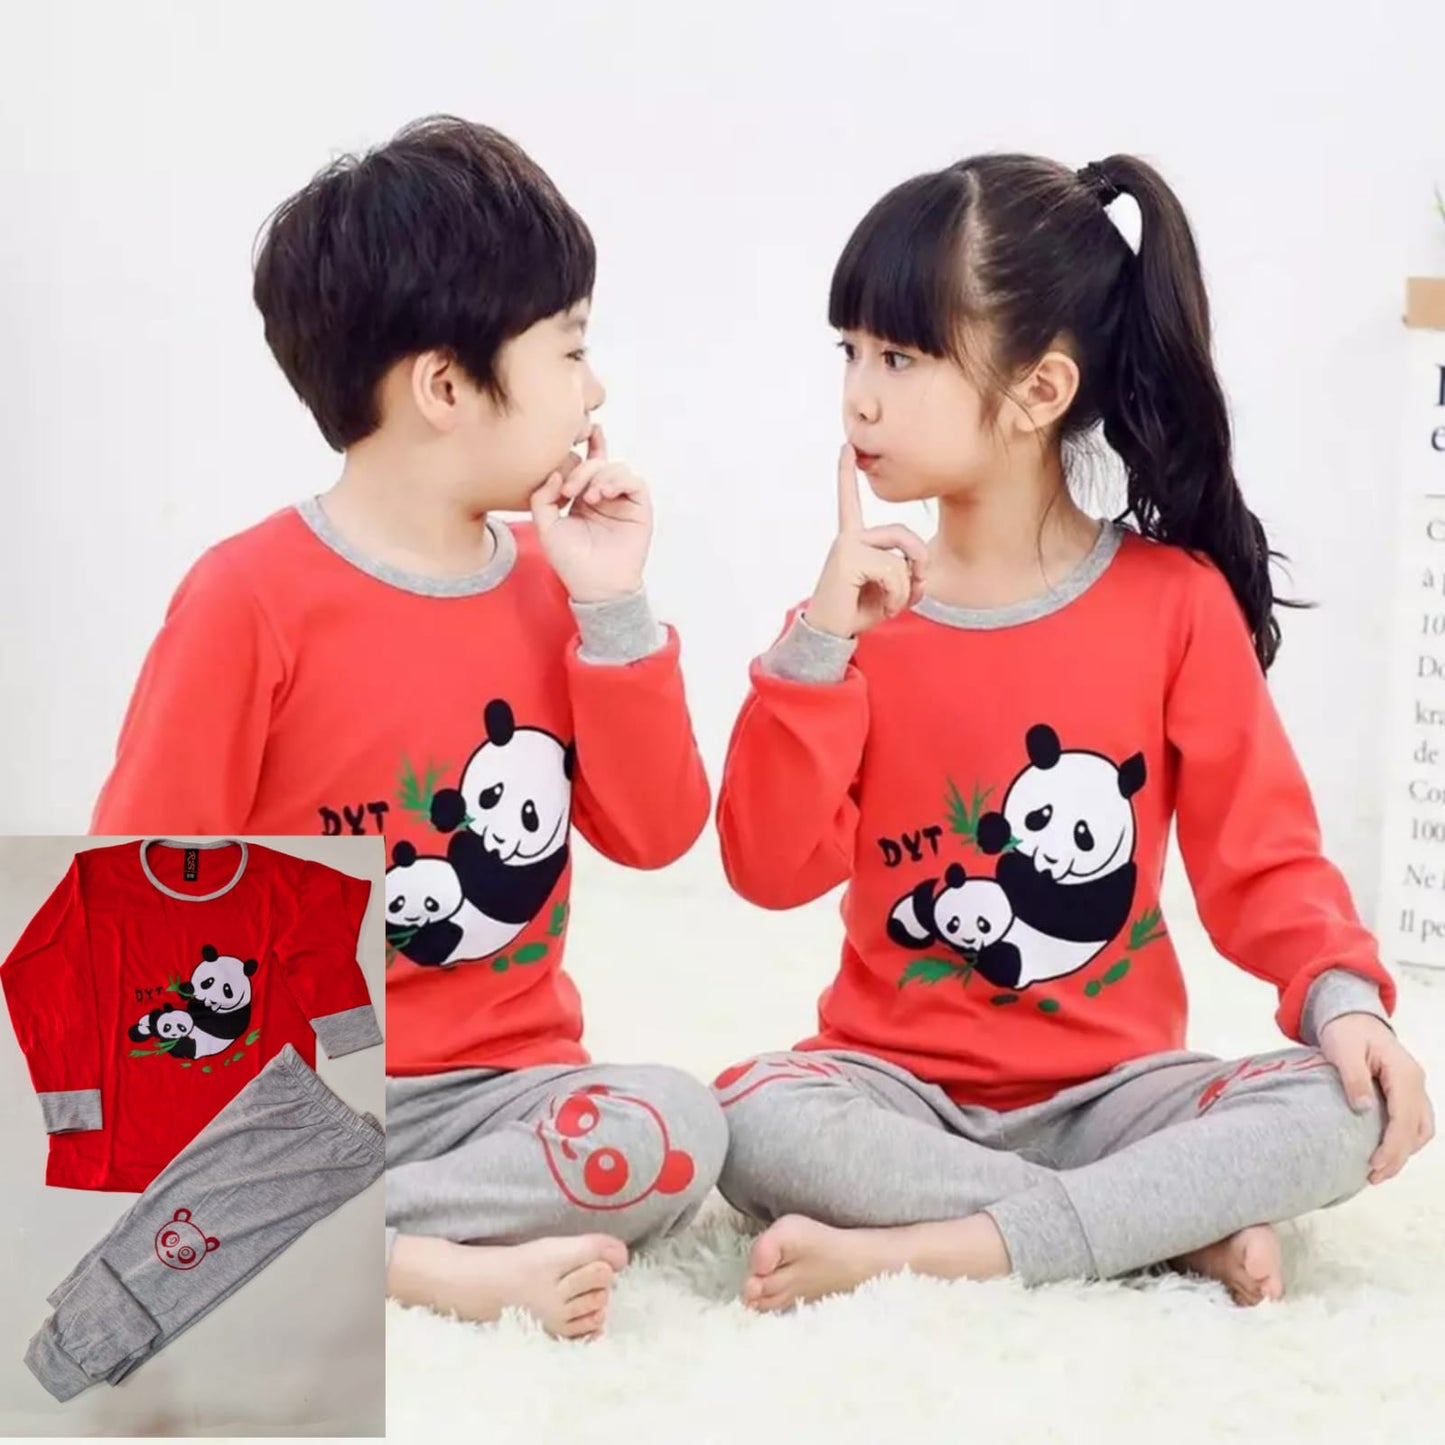 Baby or Baba Red and Grey Panda Print Full Sleeves Night Suit for Kids (1 Pcs) (RX-119)